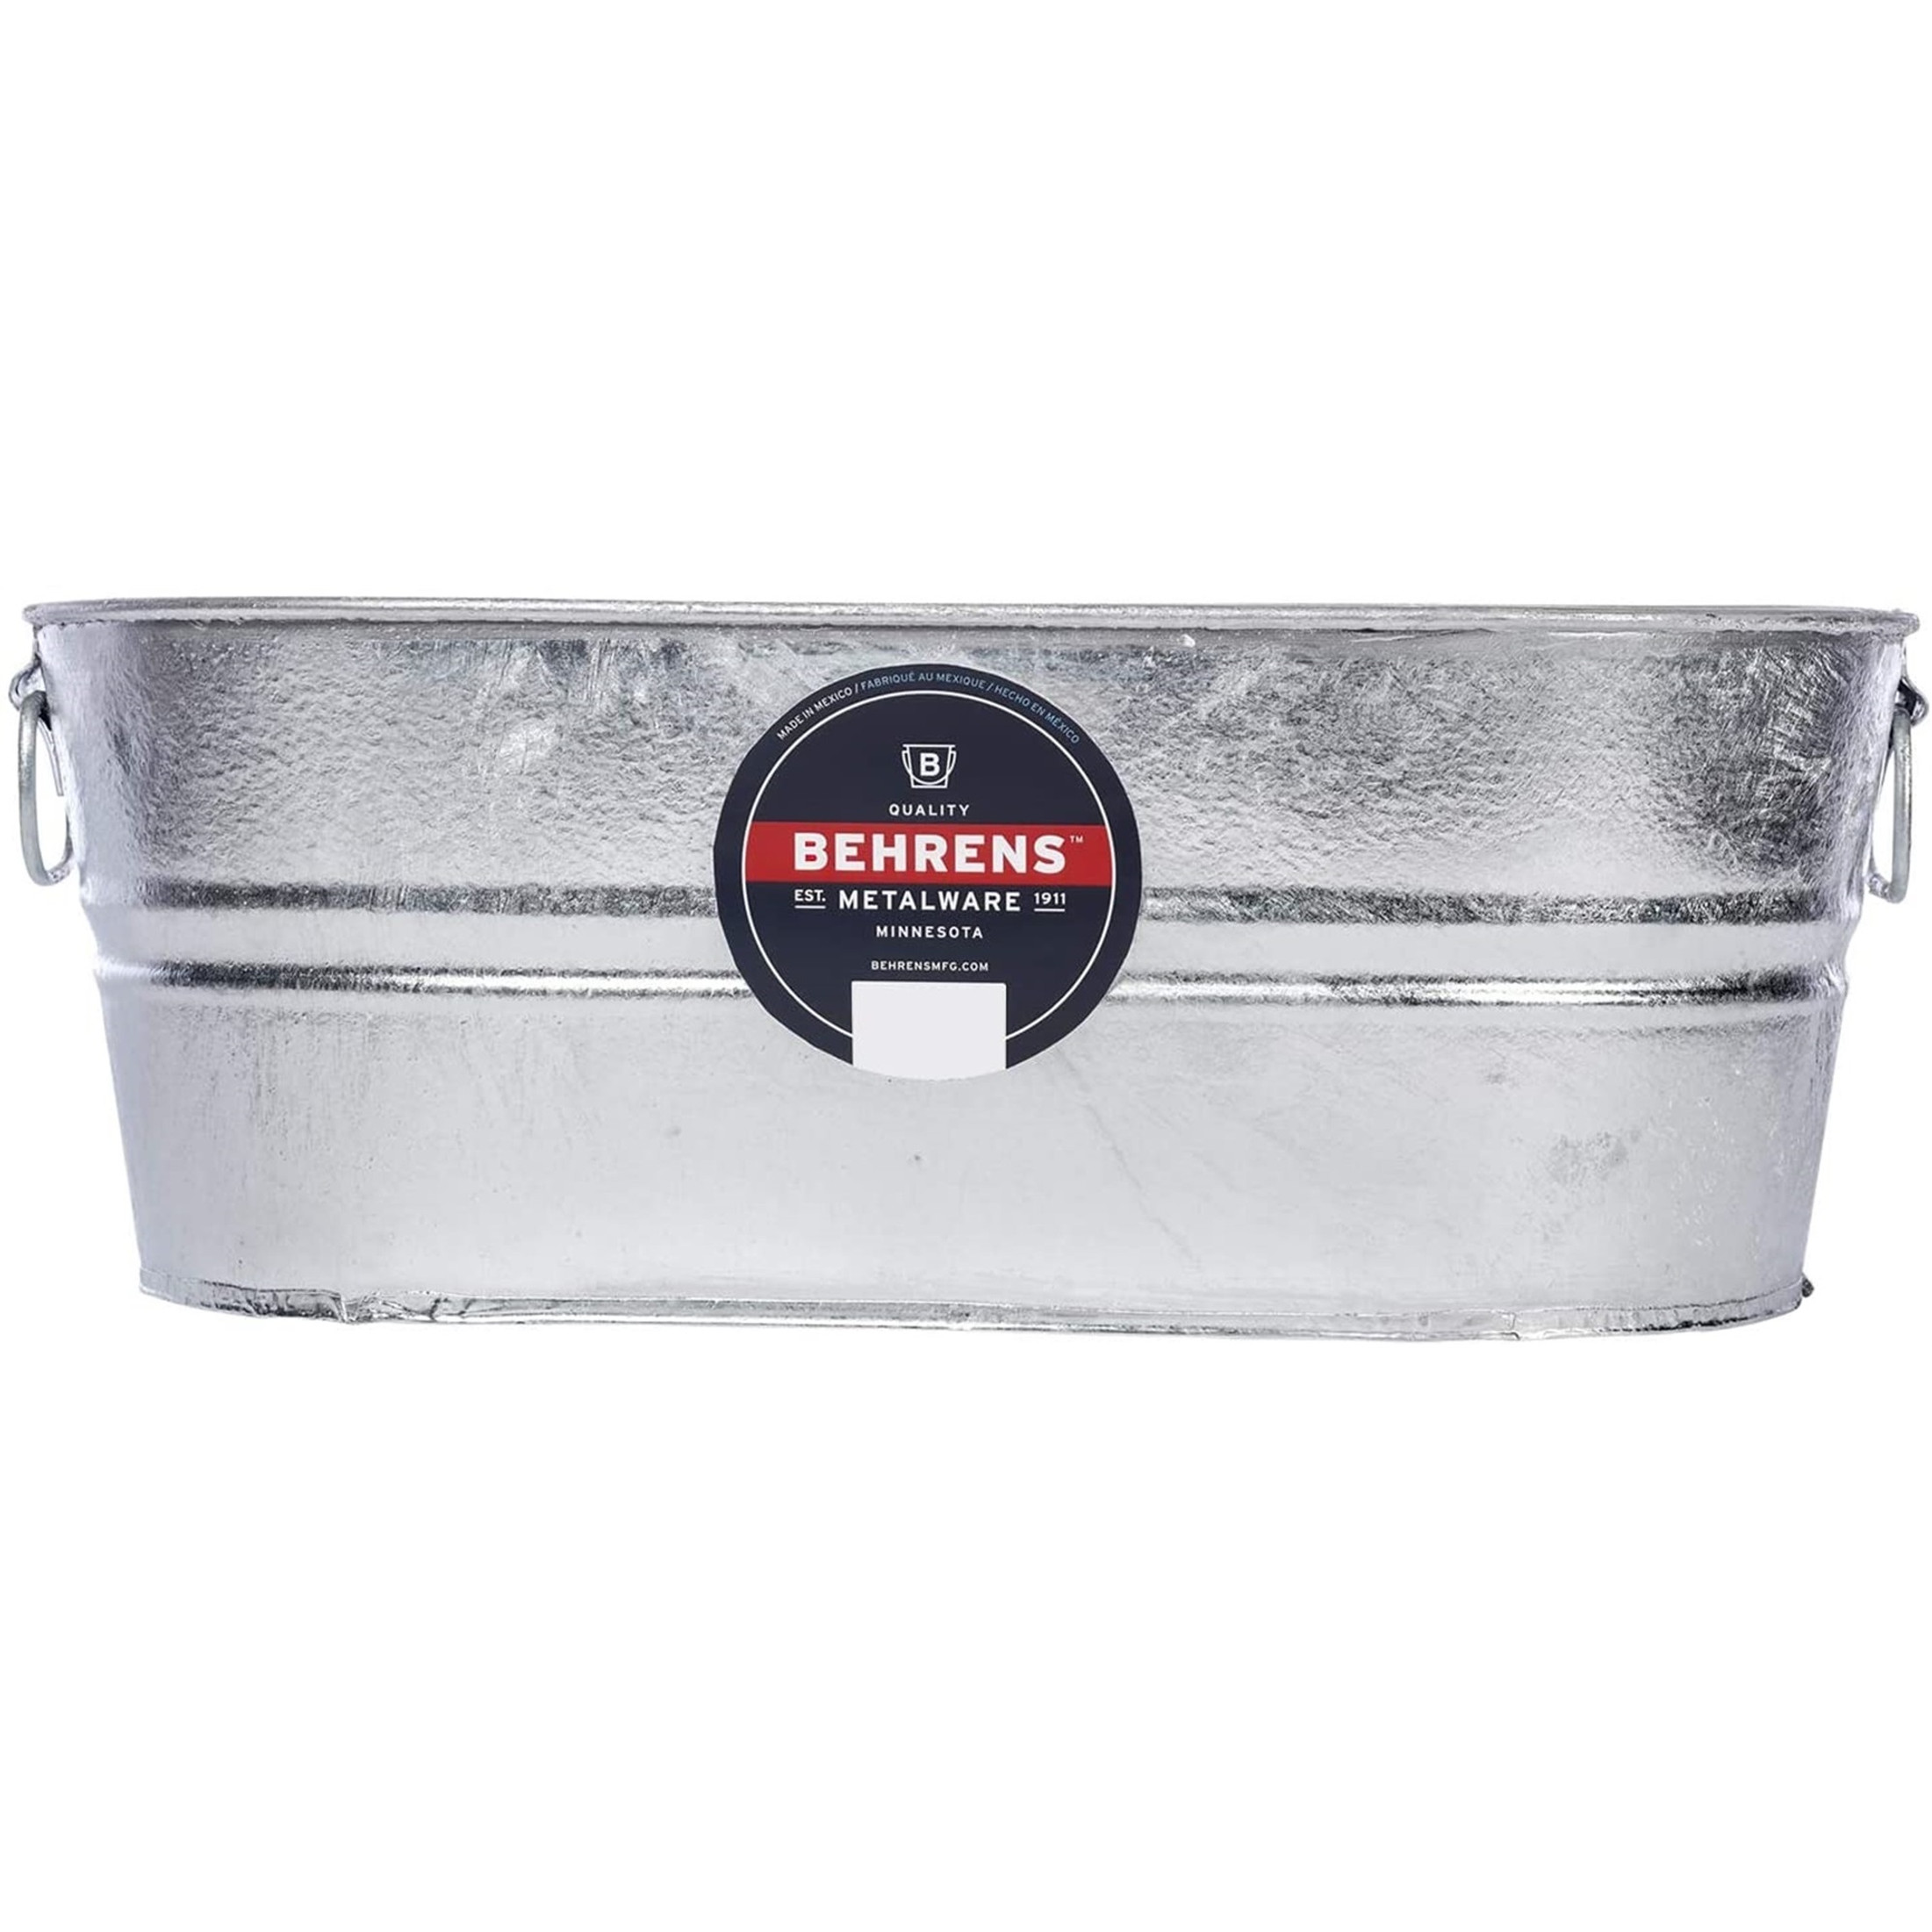 Behrens Hot Dipped Galvanized Steel Oval Planter/Tub, Silver, 5.5 Gallon Capacity